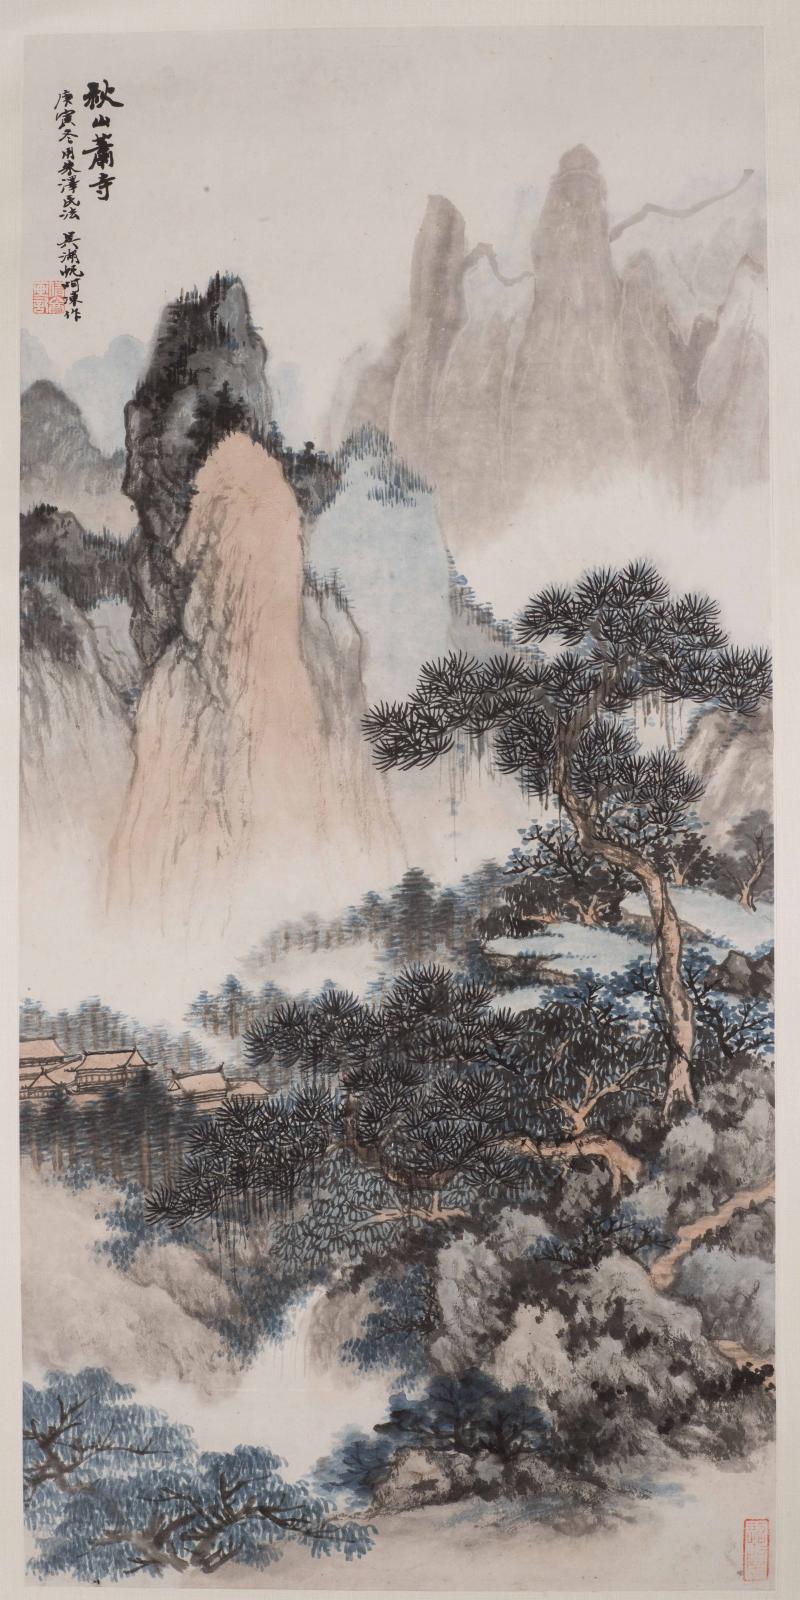 Ink and color scroll depciting a monastery in a forest and mountain valley